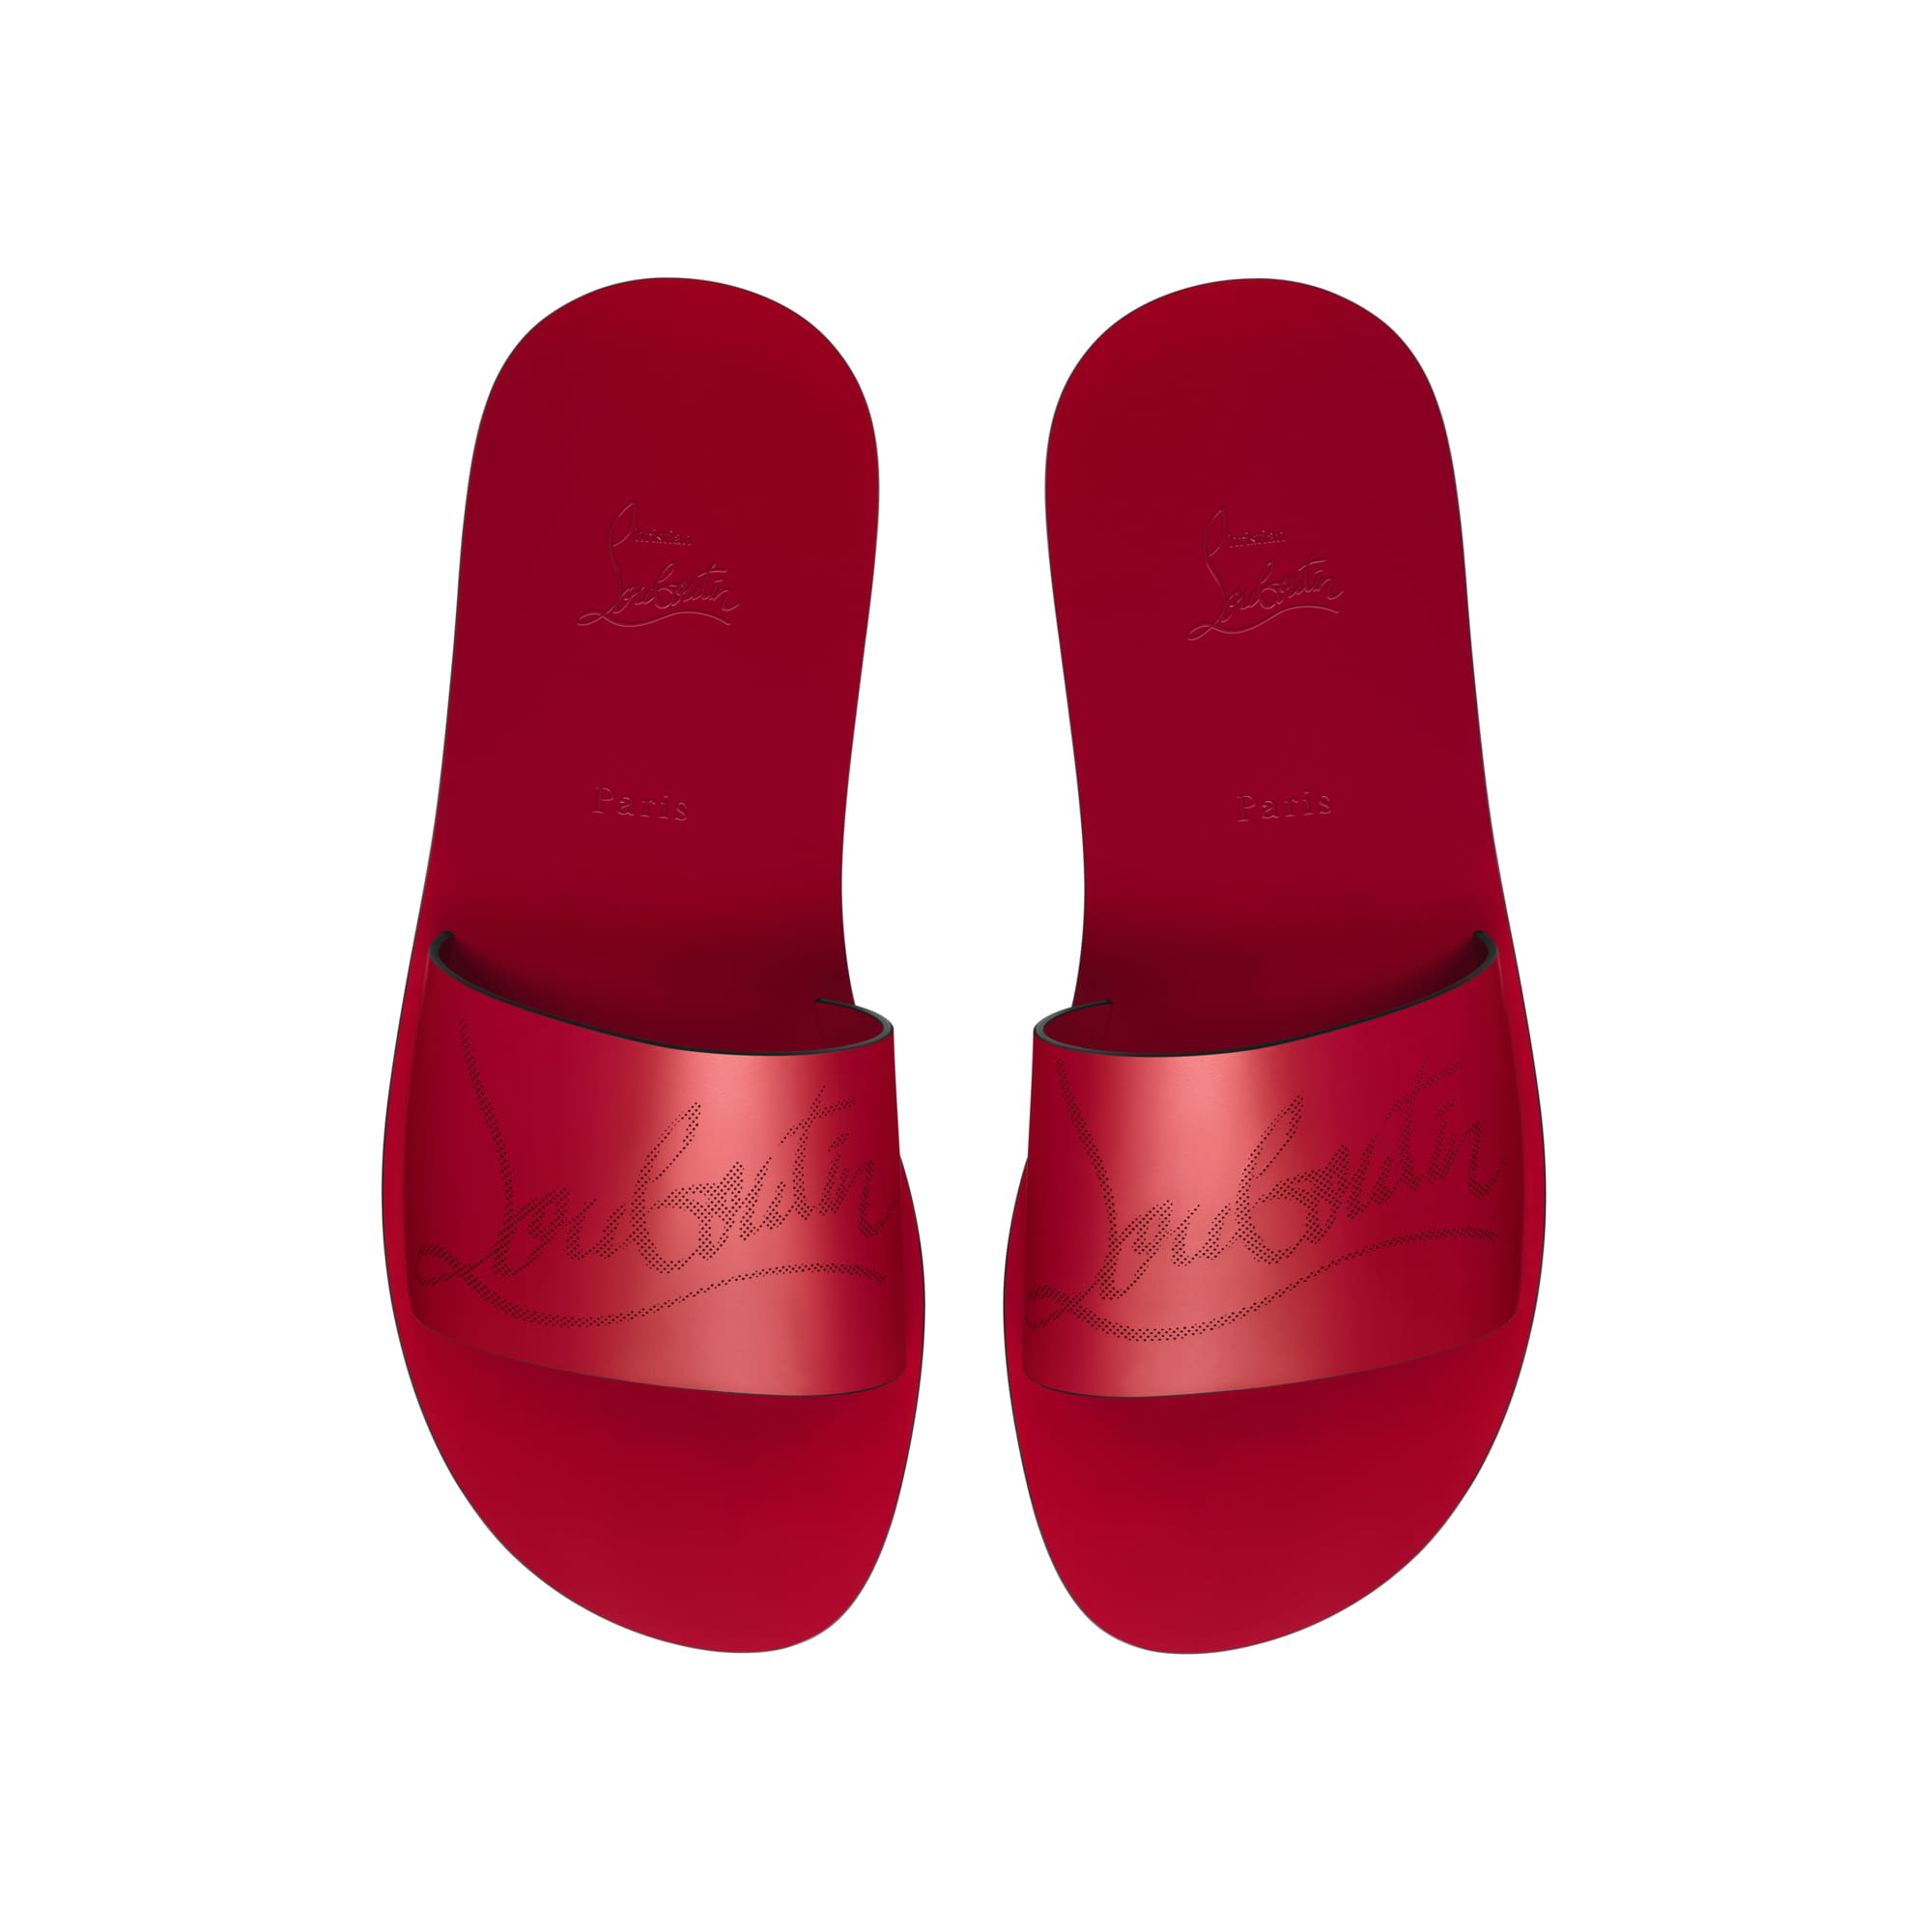 Christian Louboutin Coolraoul Sandals - Calf leather - Loubi Red